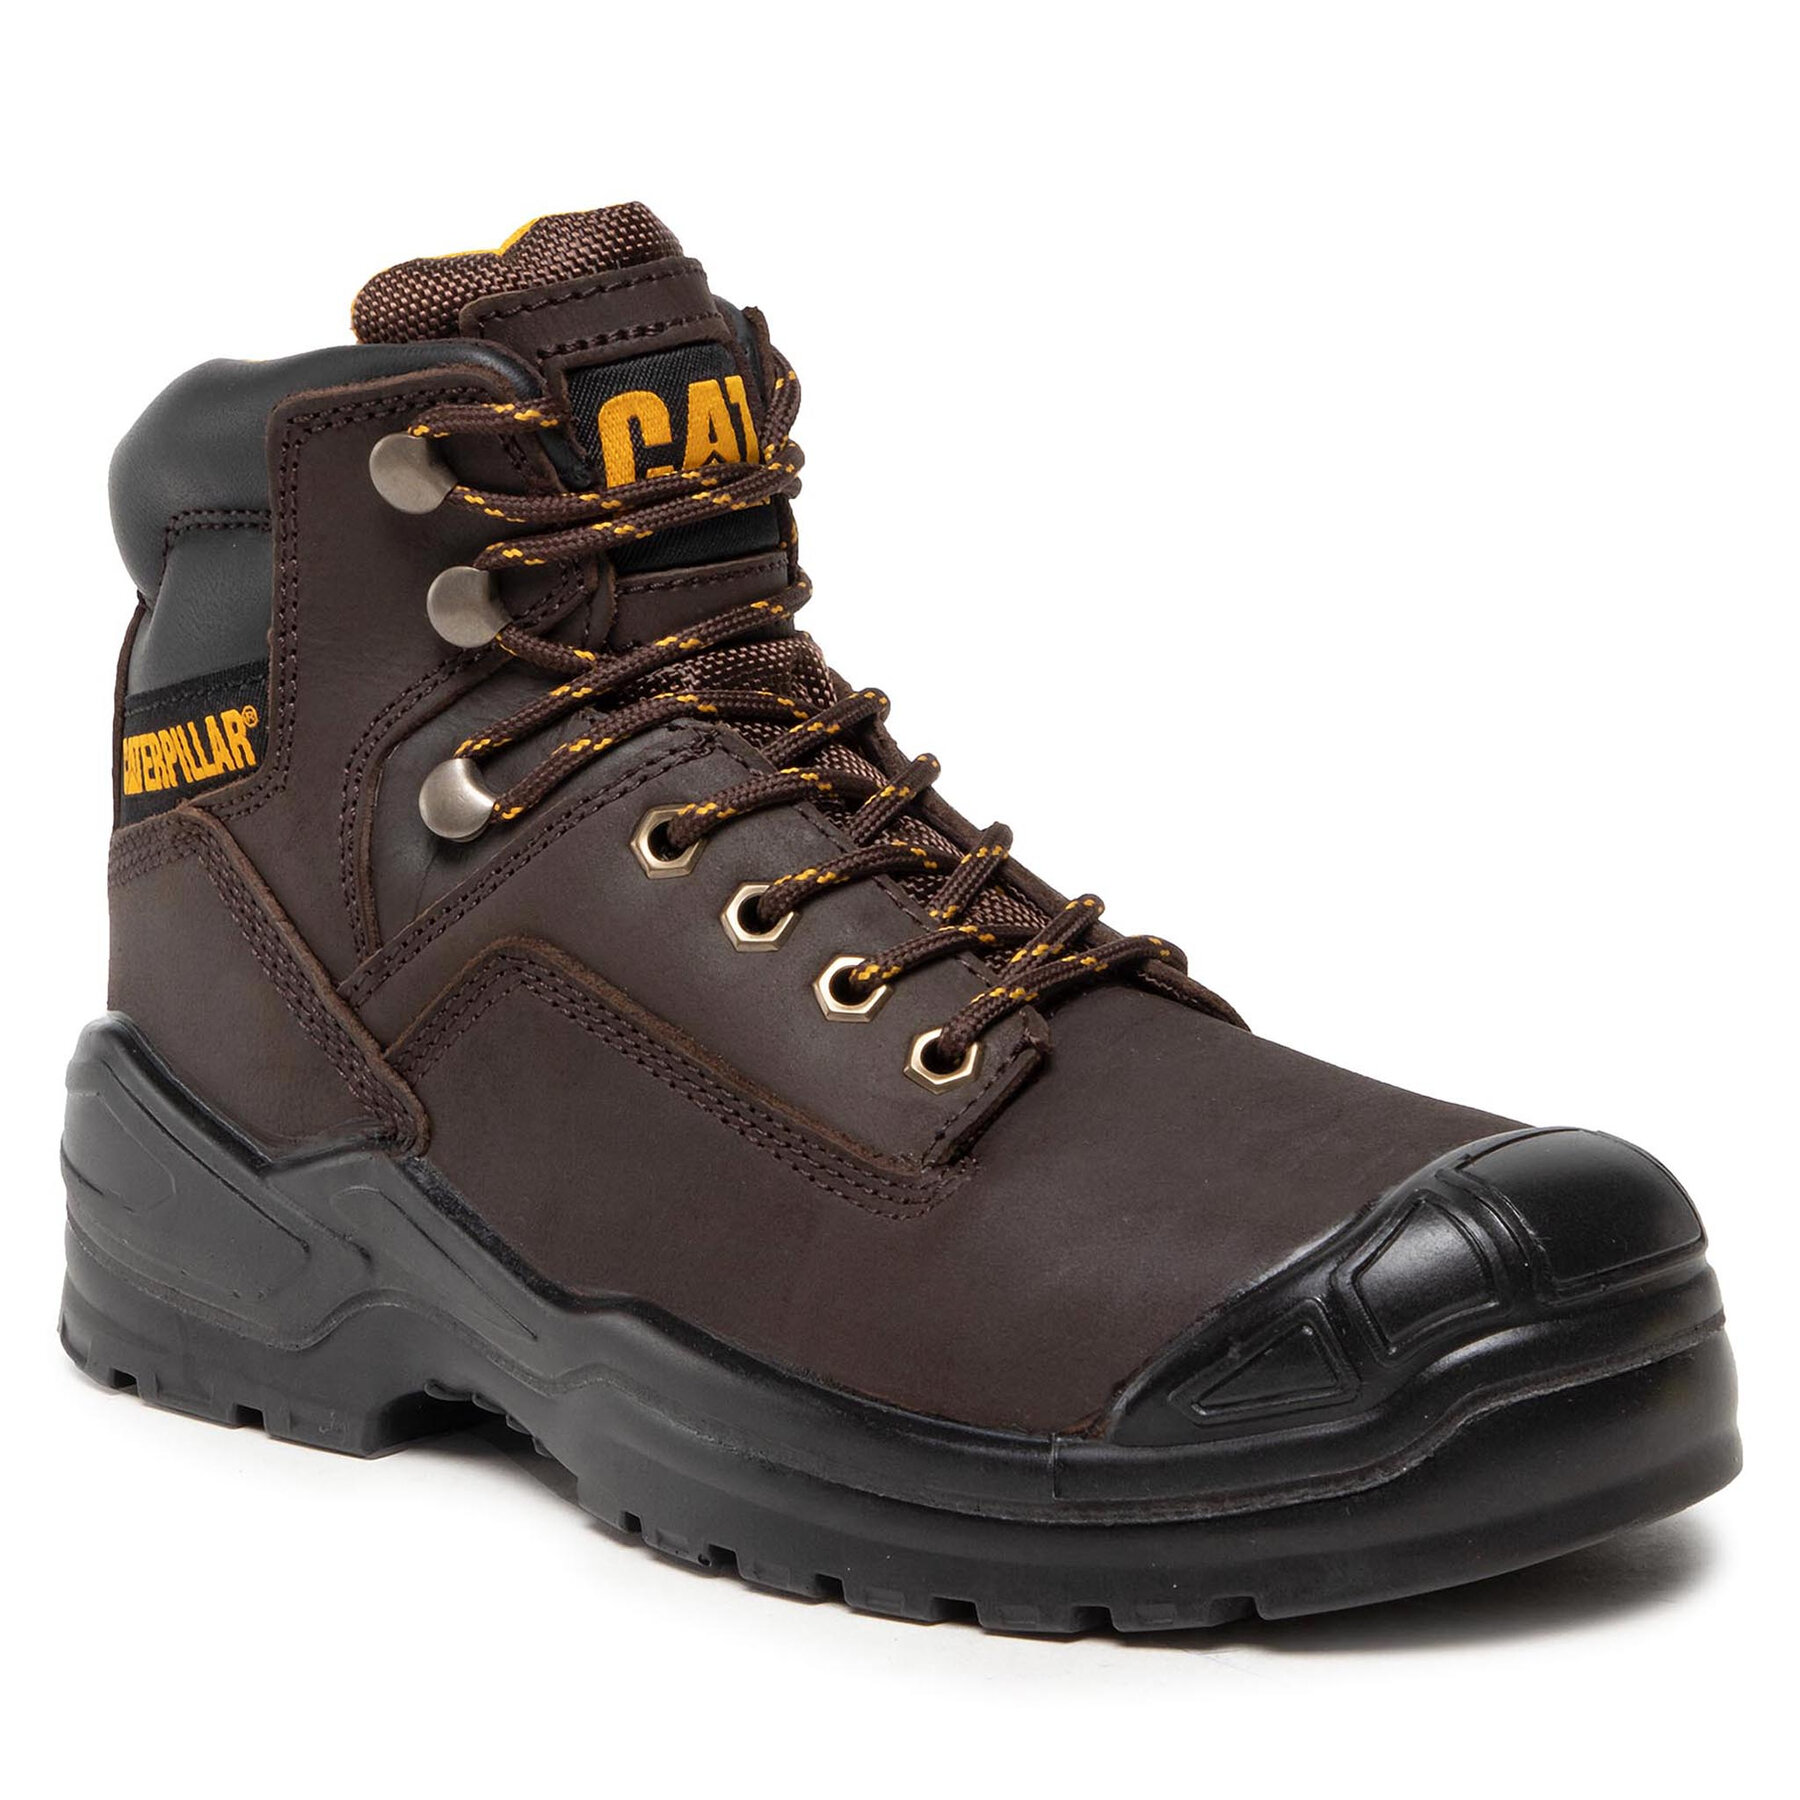 Trappers CATerpillar Striver Bump St S3 P725098 Brown